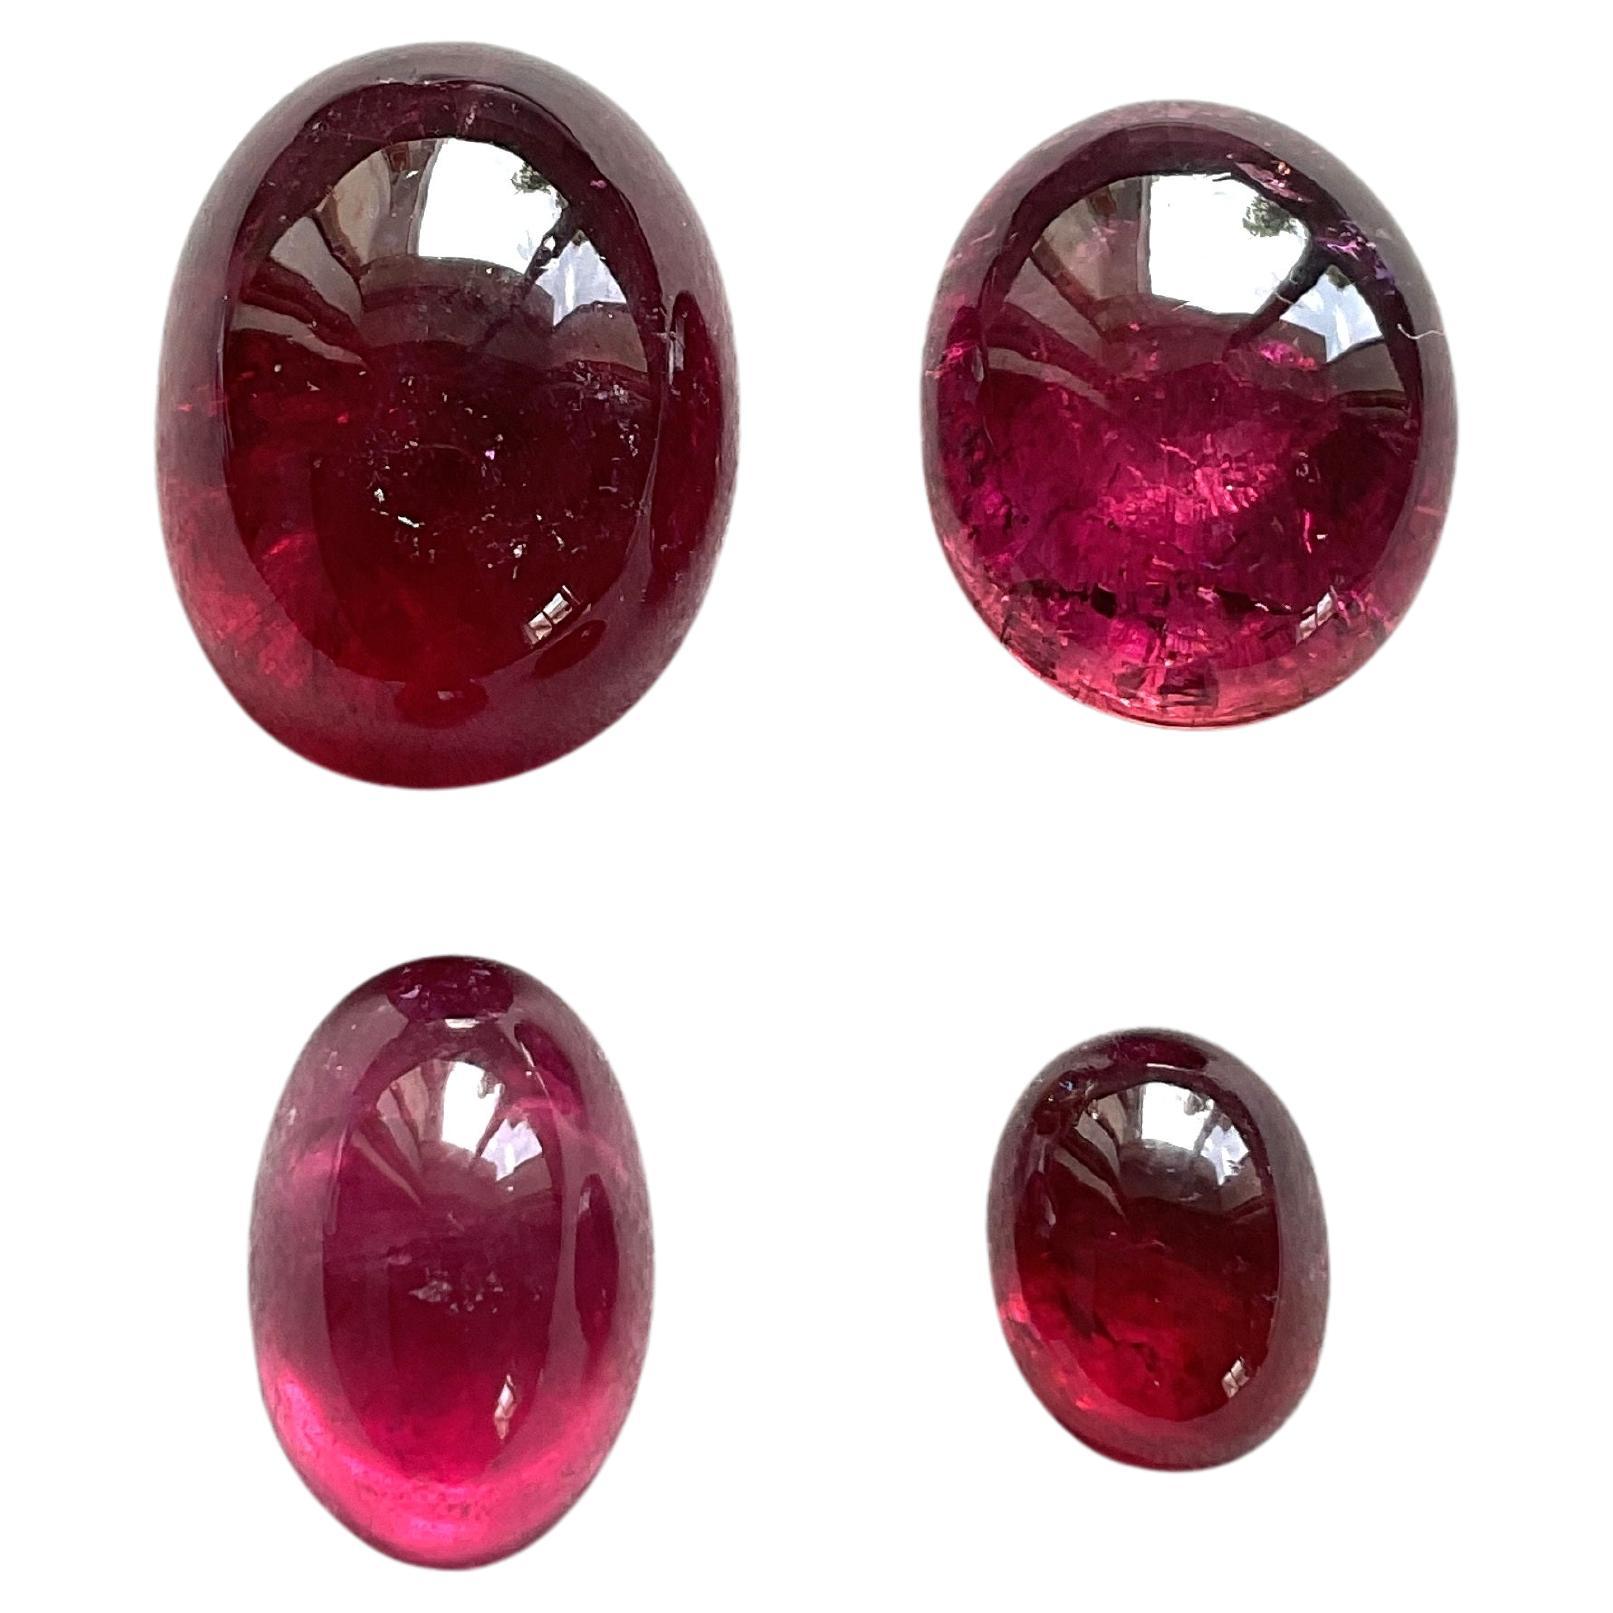 92.86 Carats Top Quality Rubellite Tourmaline Cabochon 4 Pieces Natural Gemstone For Sale